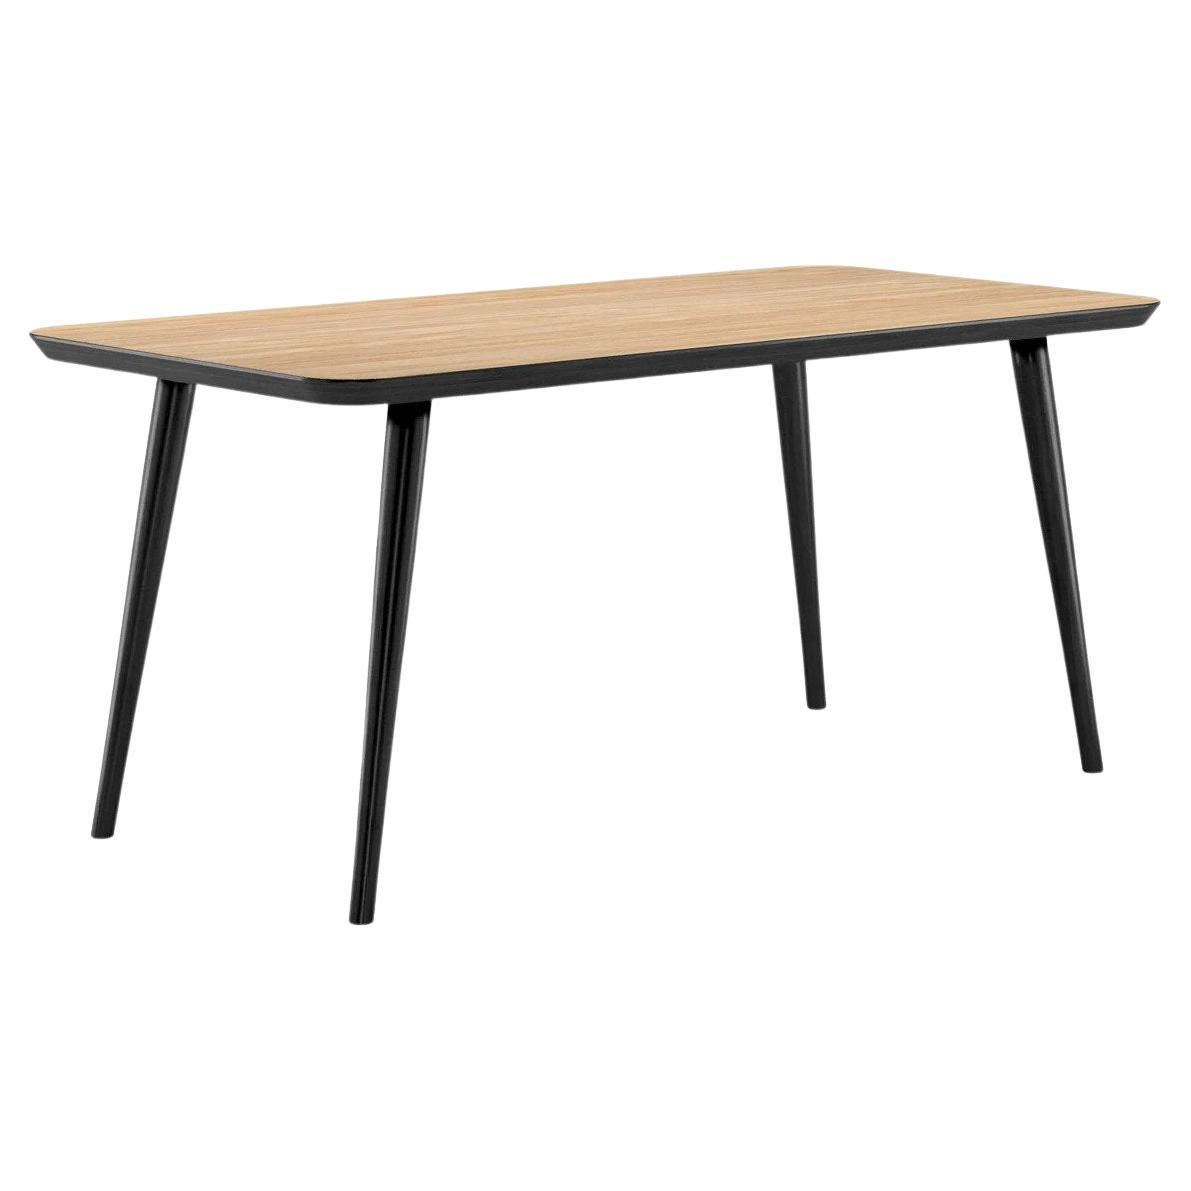 Hayche WW Rectangular Dining Table Oak & Black, United Kingdom, Made to Order For Sale